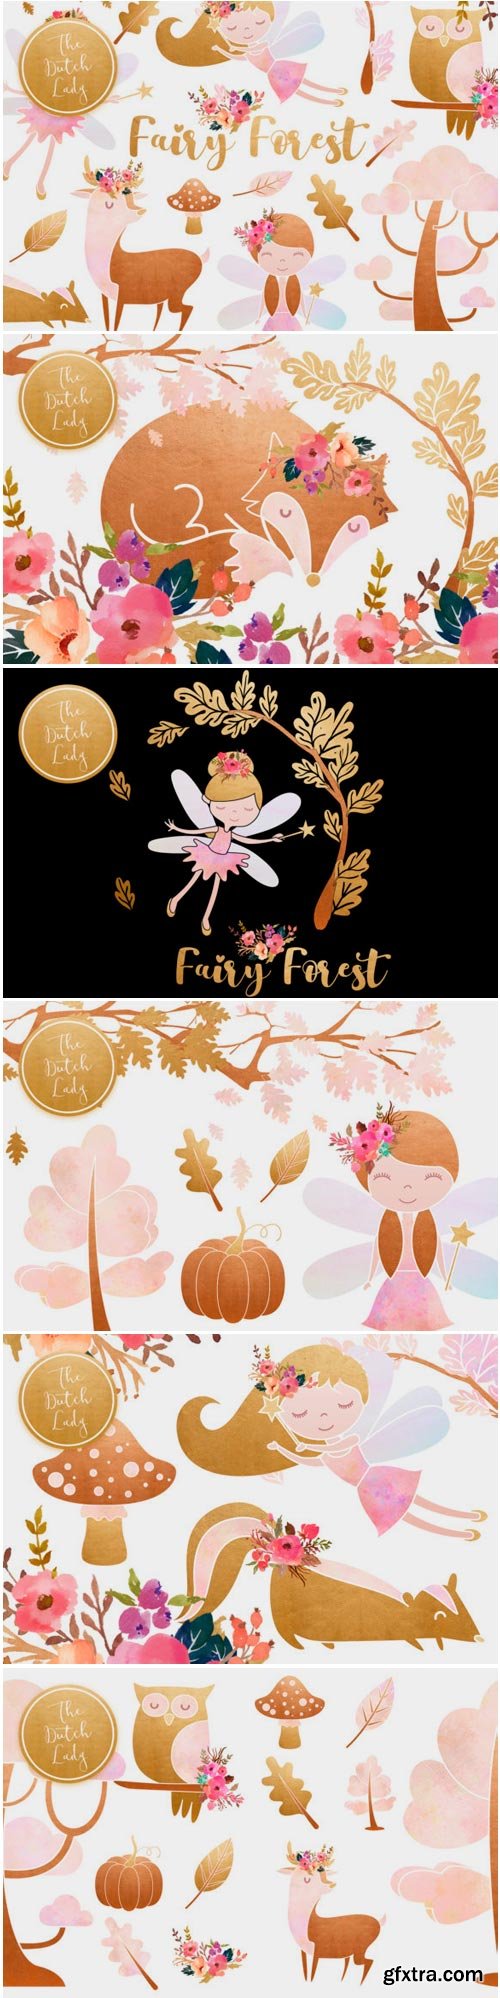 Enchanted Fairy Forest Clipart Set 1576532